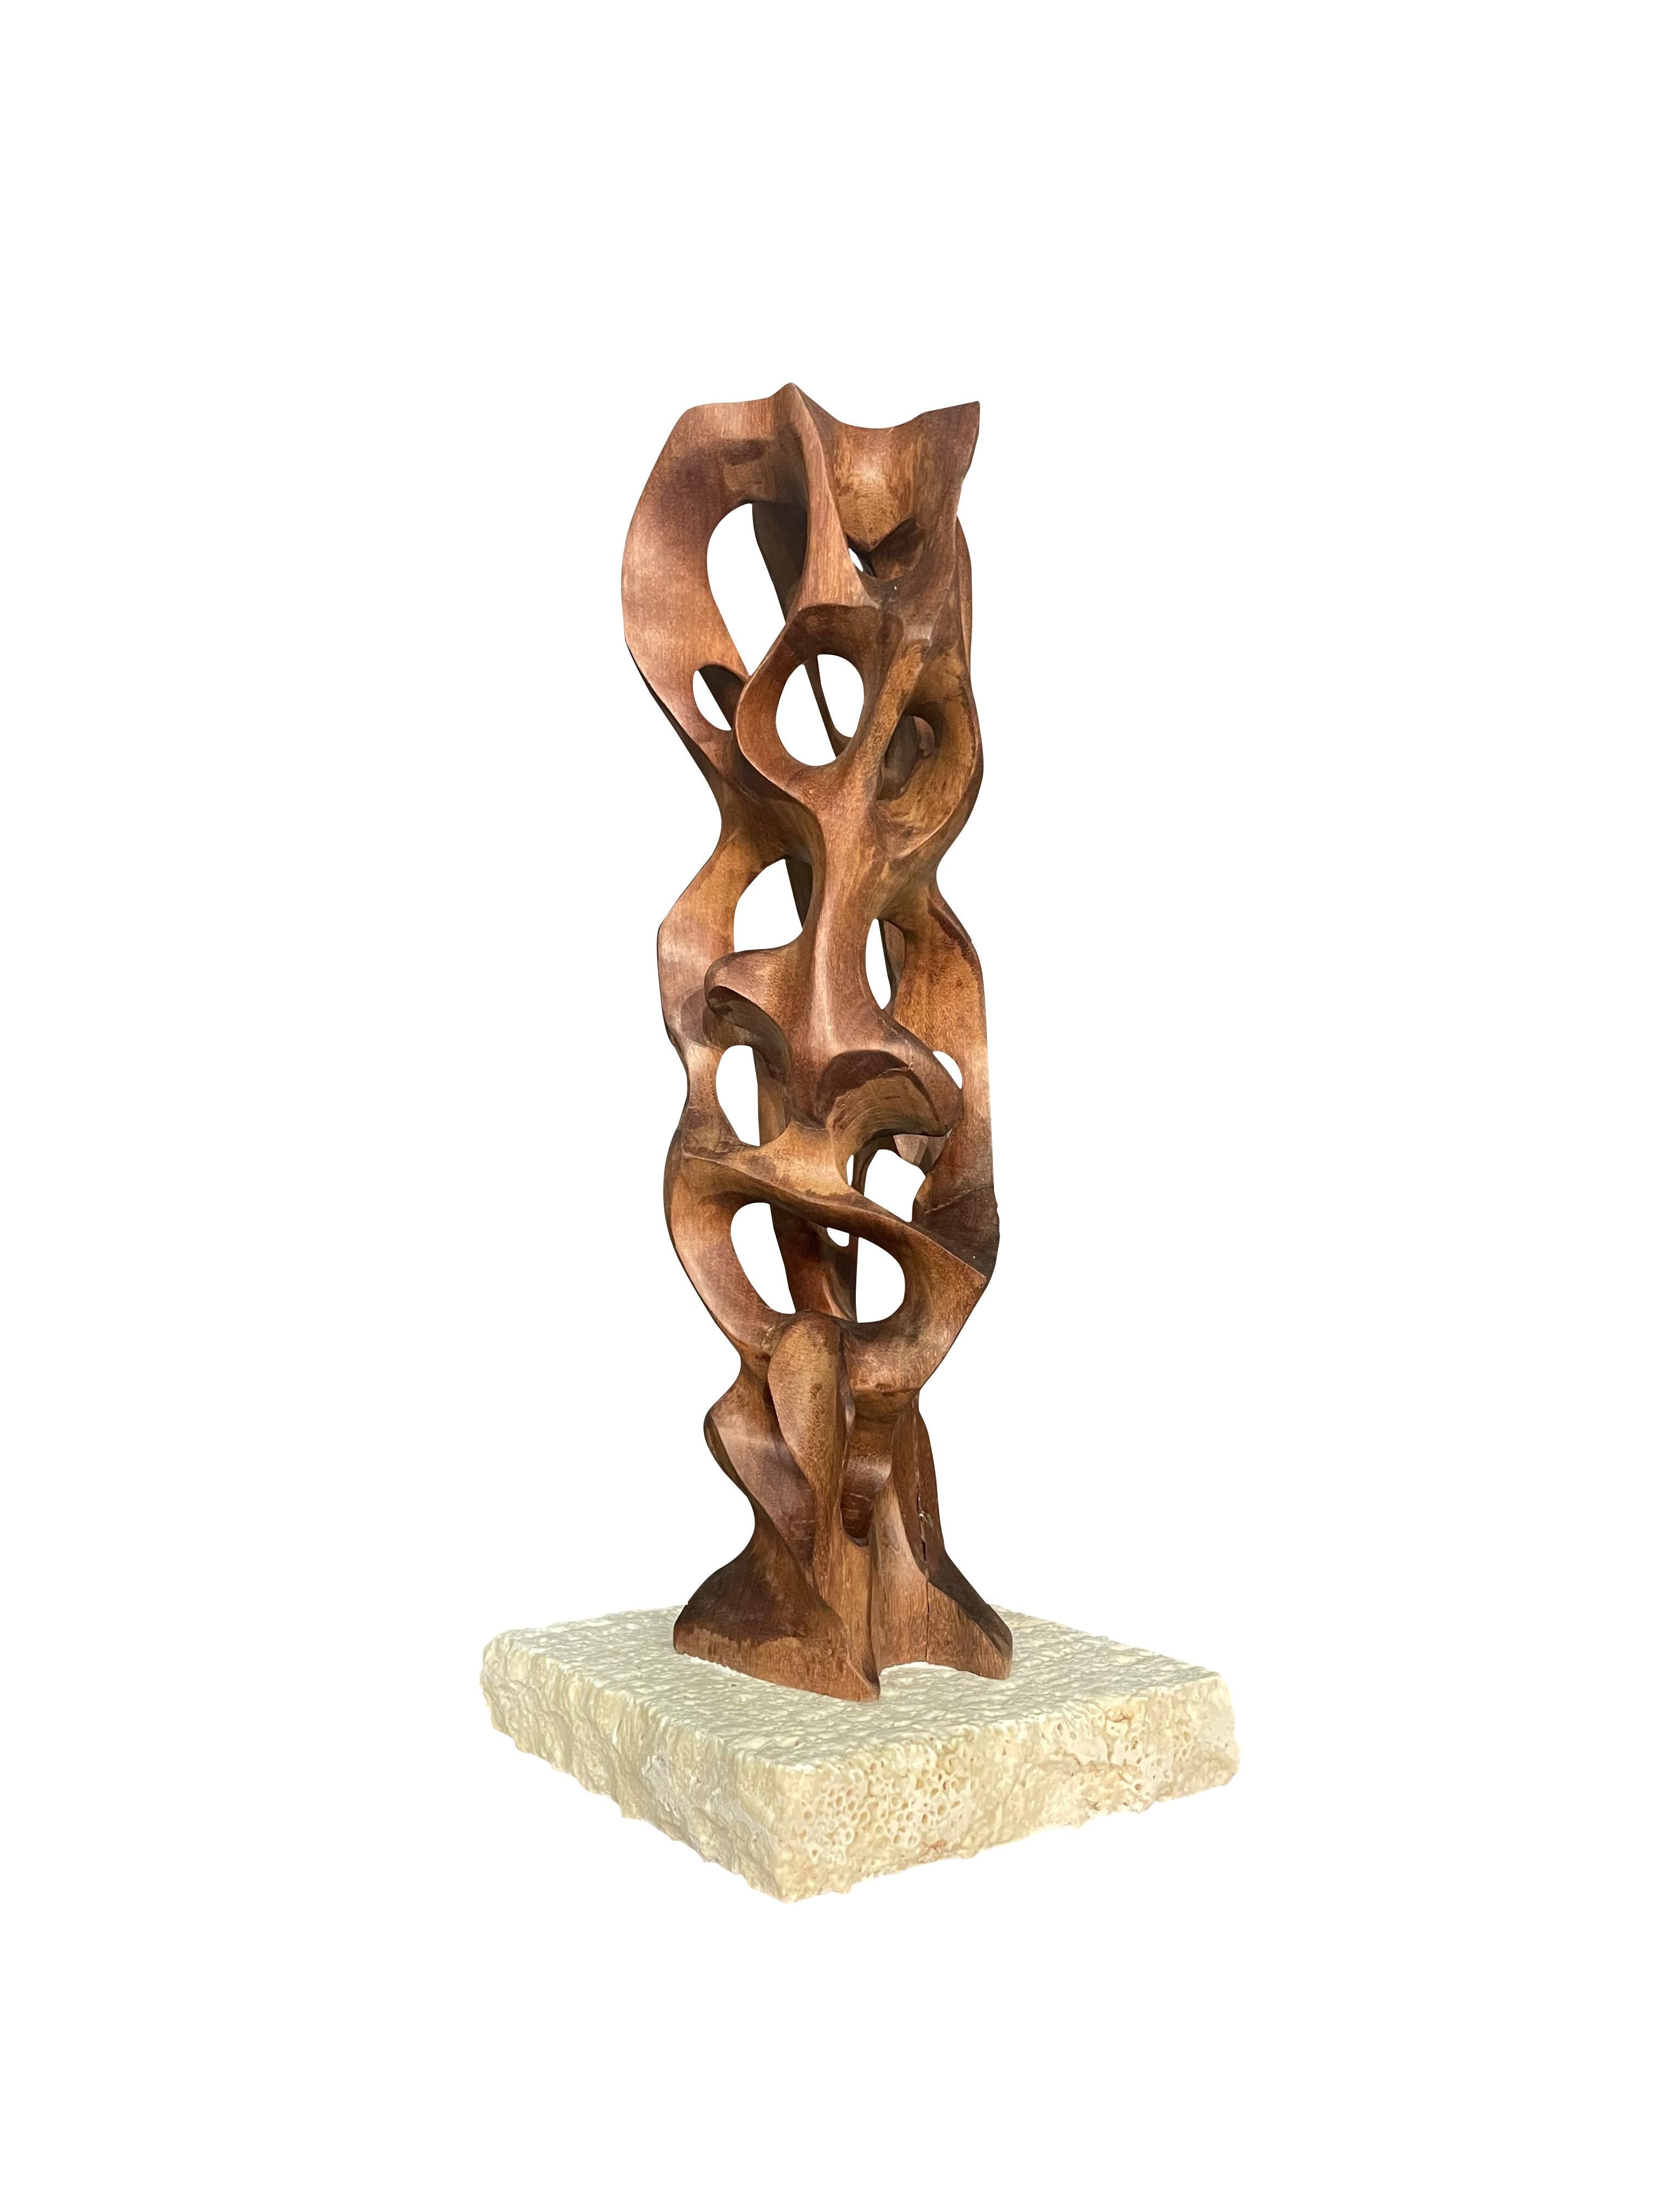 Contemporary Italian hand carved wood sculpture on travertine base.
Smooth finish.
Base measures 6